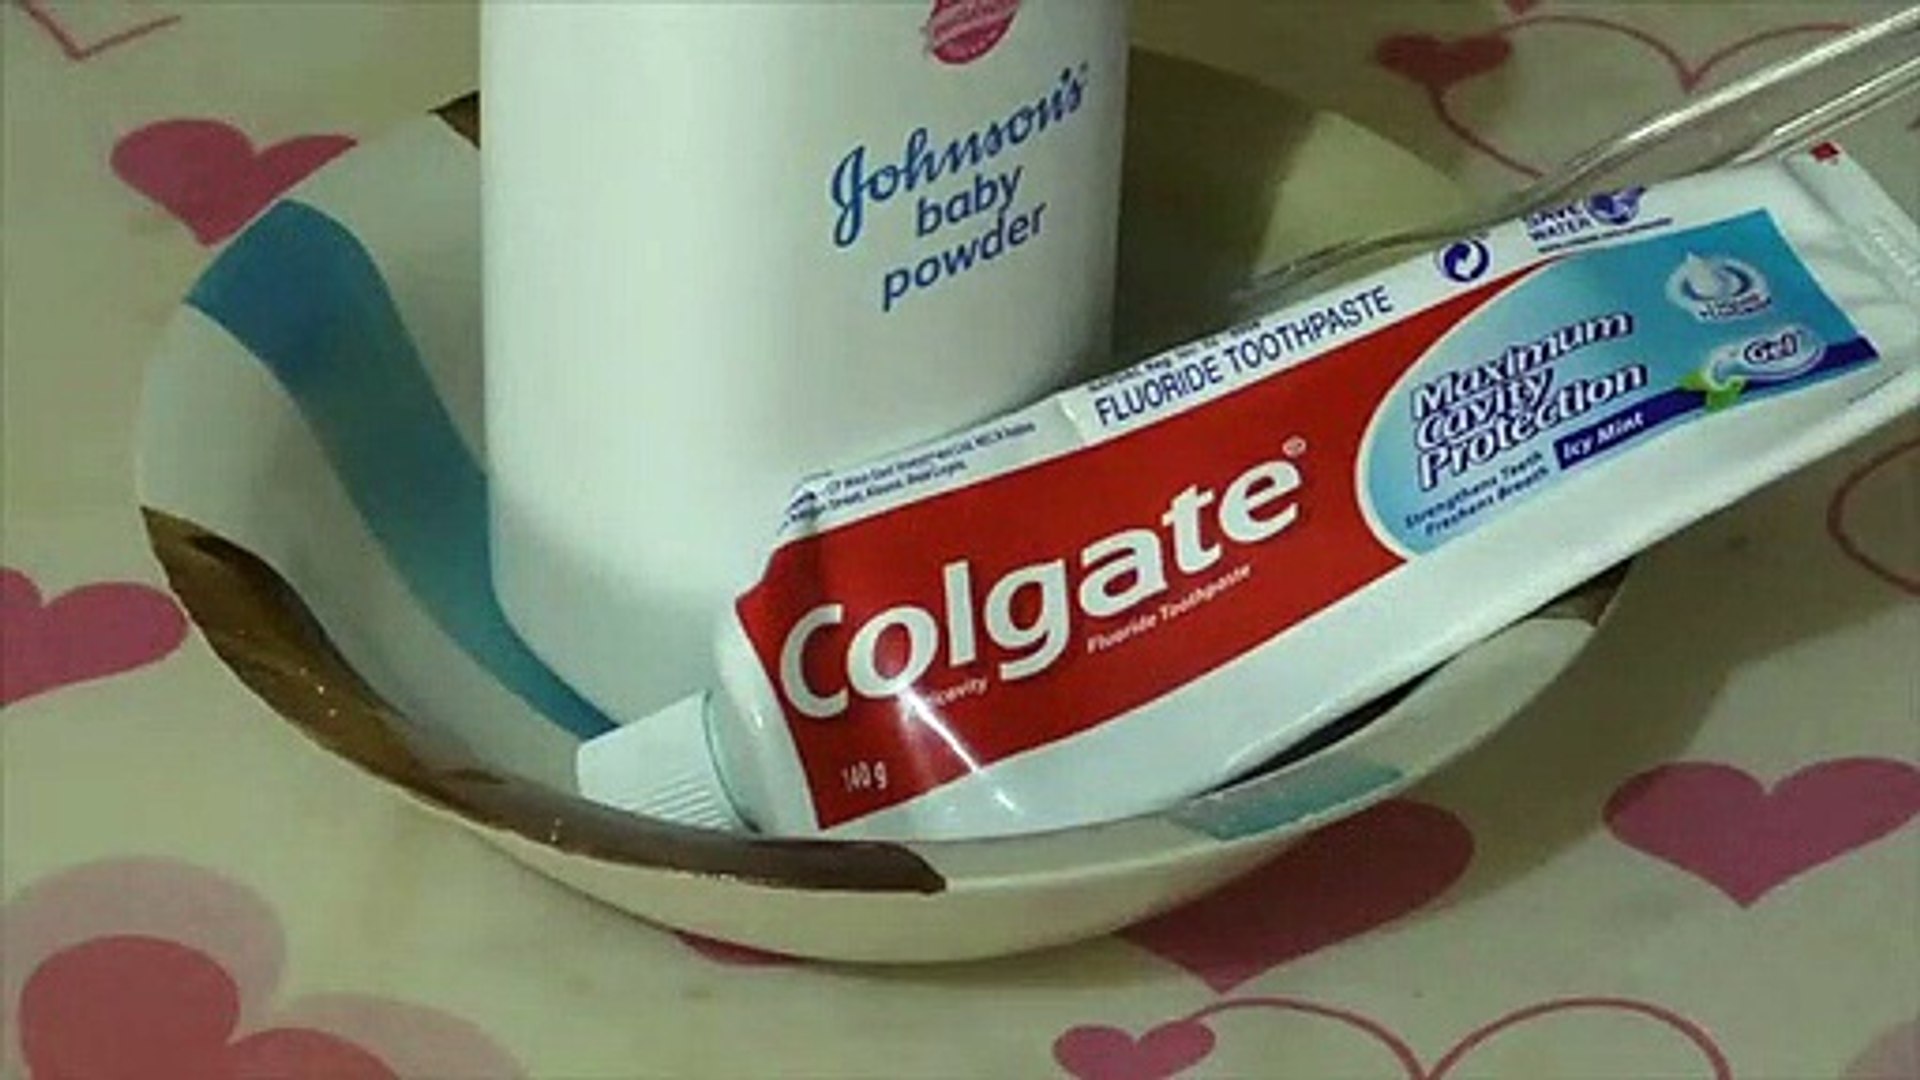 Colgate Toothpaste Slime With Baby Powder How To Make Slime With Baby Powder And Toothpaste Only